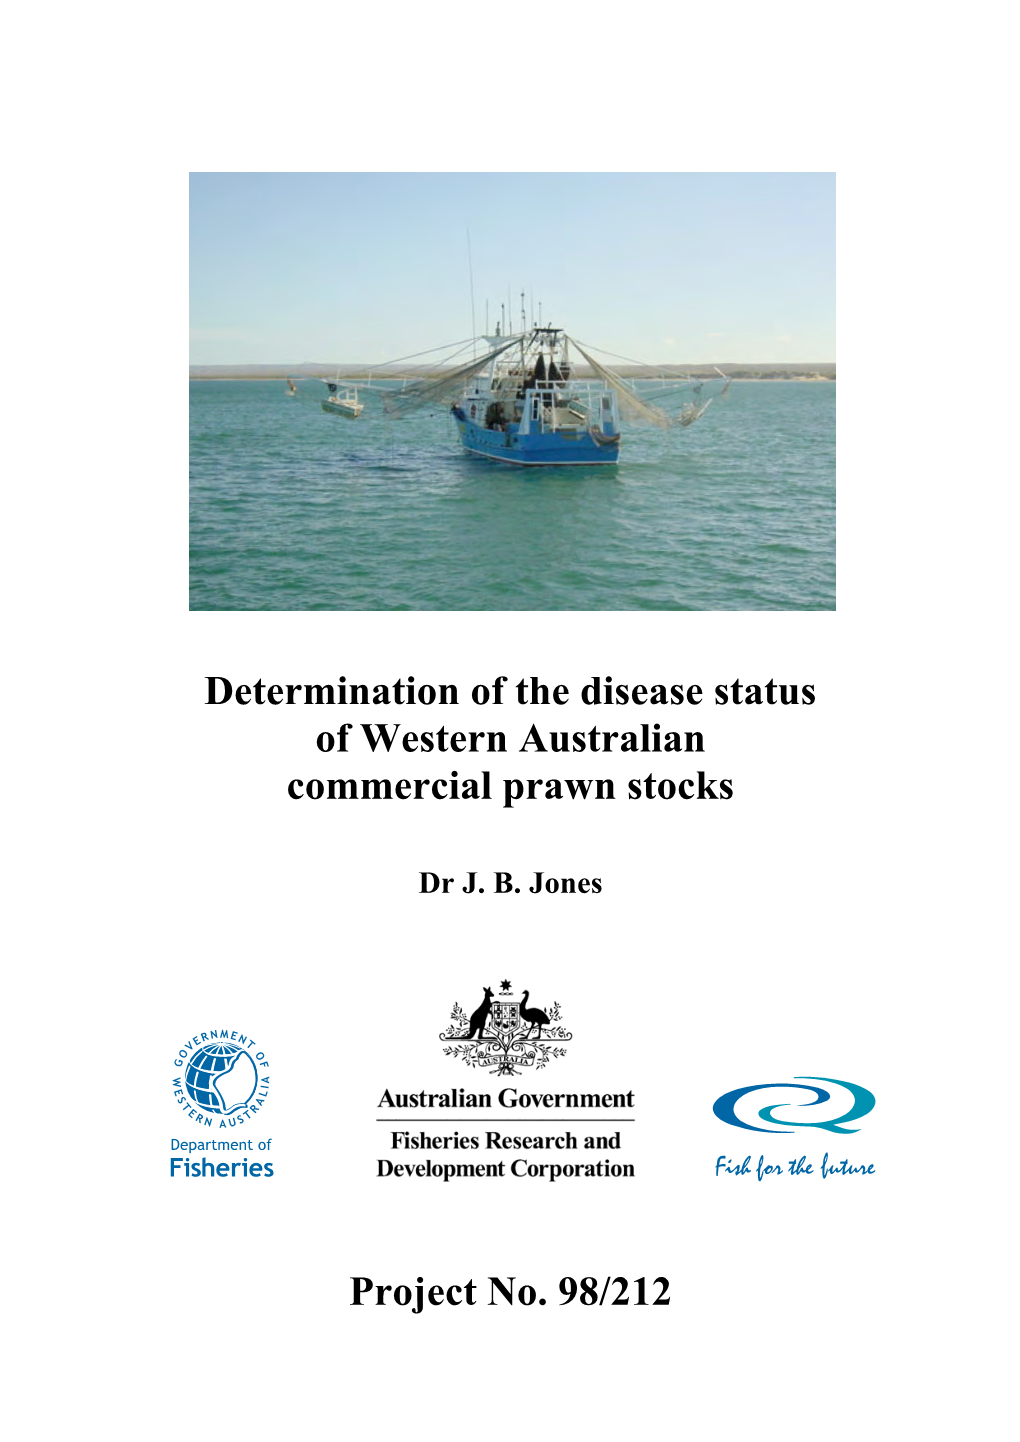 Determination of the Disease Status of Western Australian Commercial Prawn Stocks Project No. 98/212